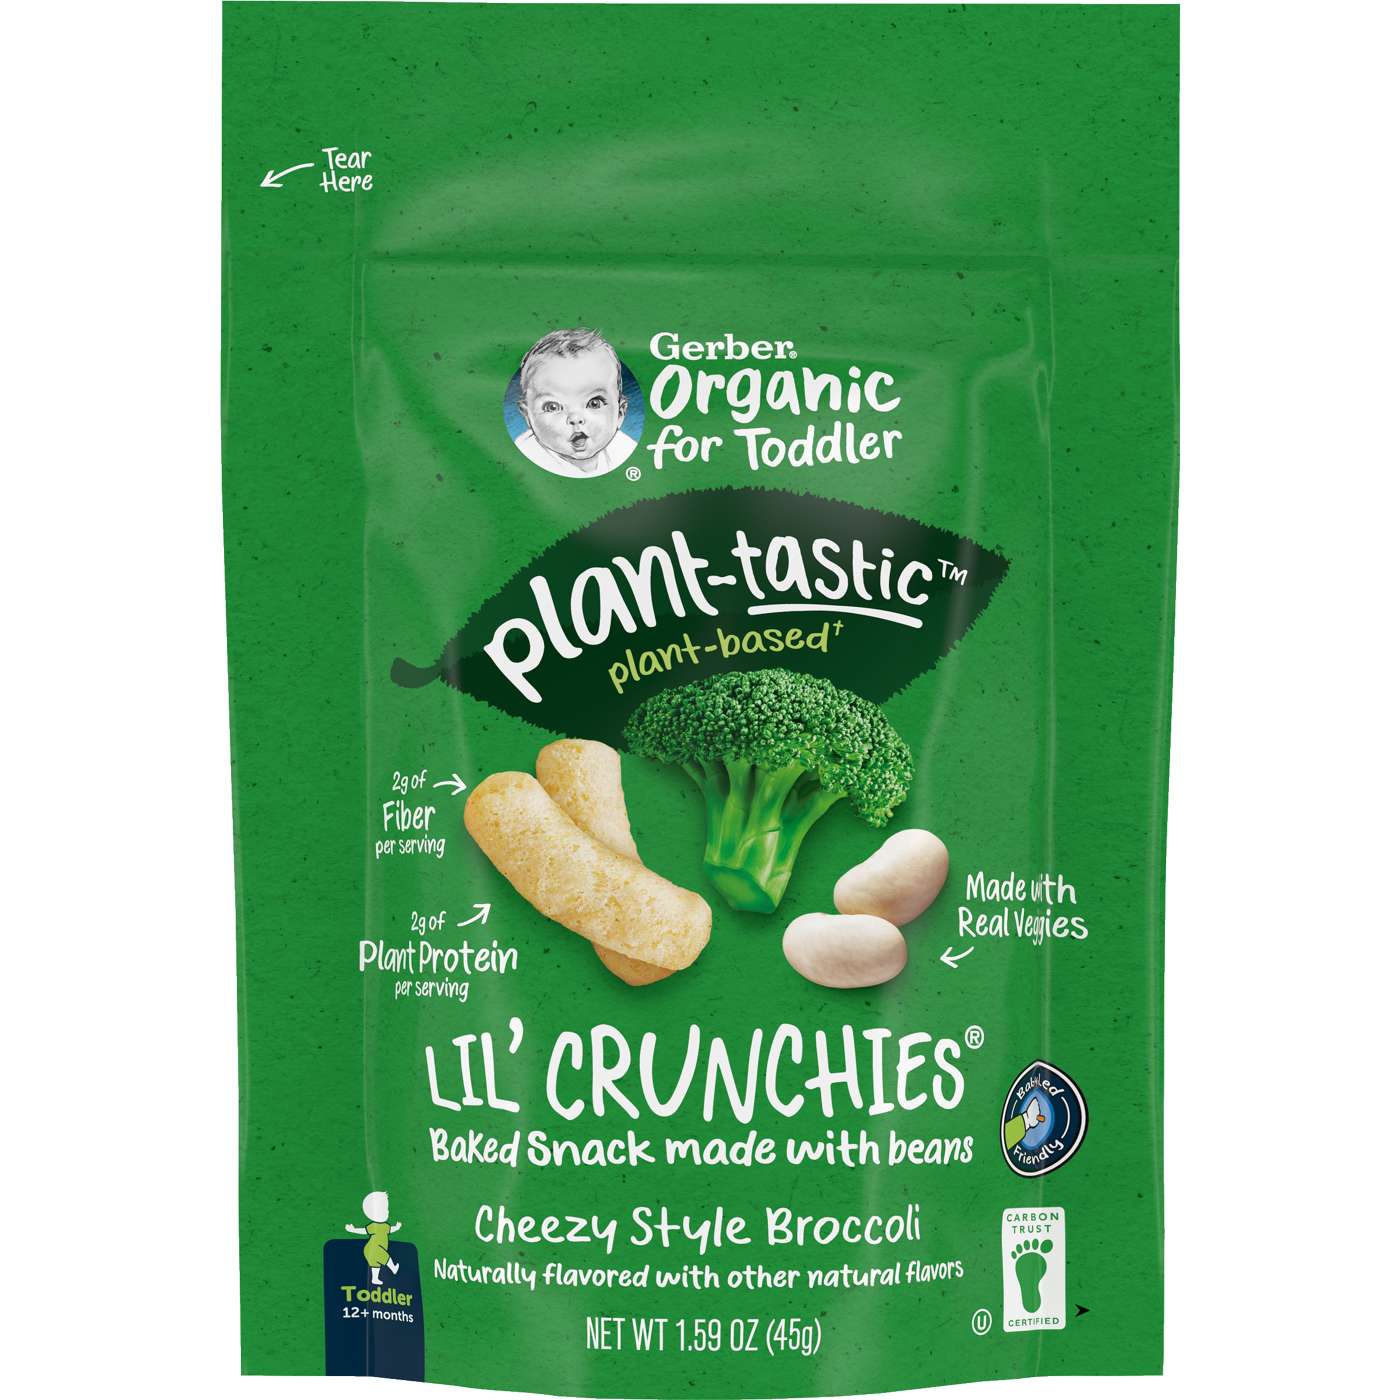 Gerber Organic for Toddler Lil' Crunchies - Cheezy Style Broccoli; image 1 of 2